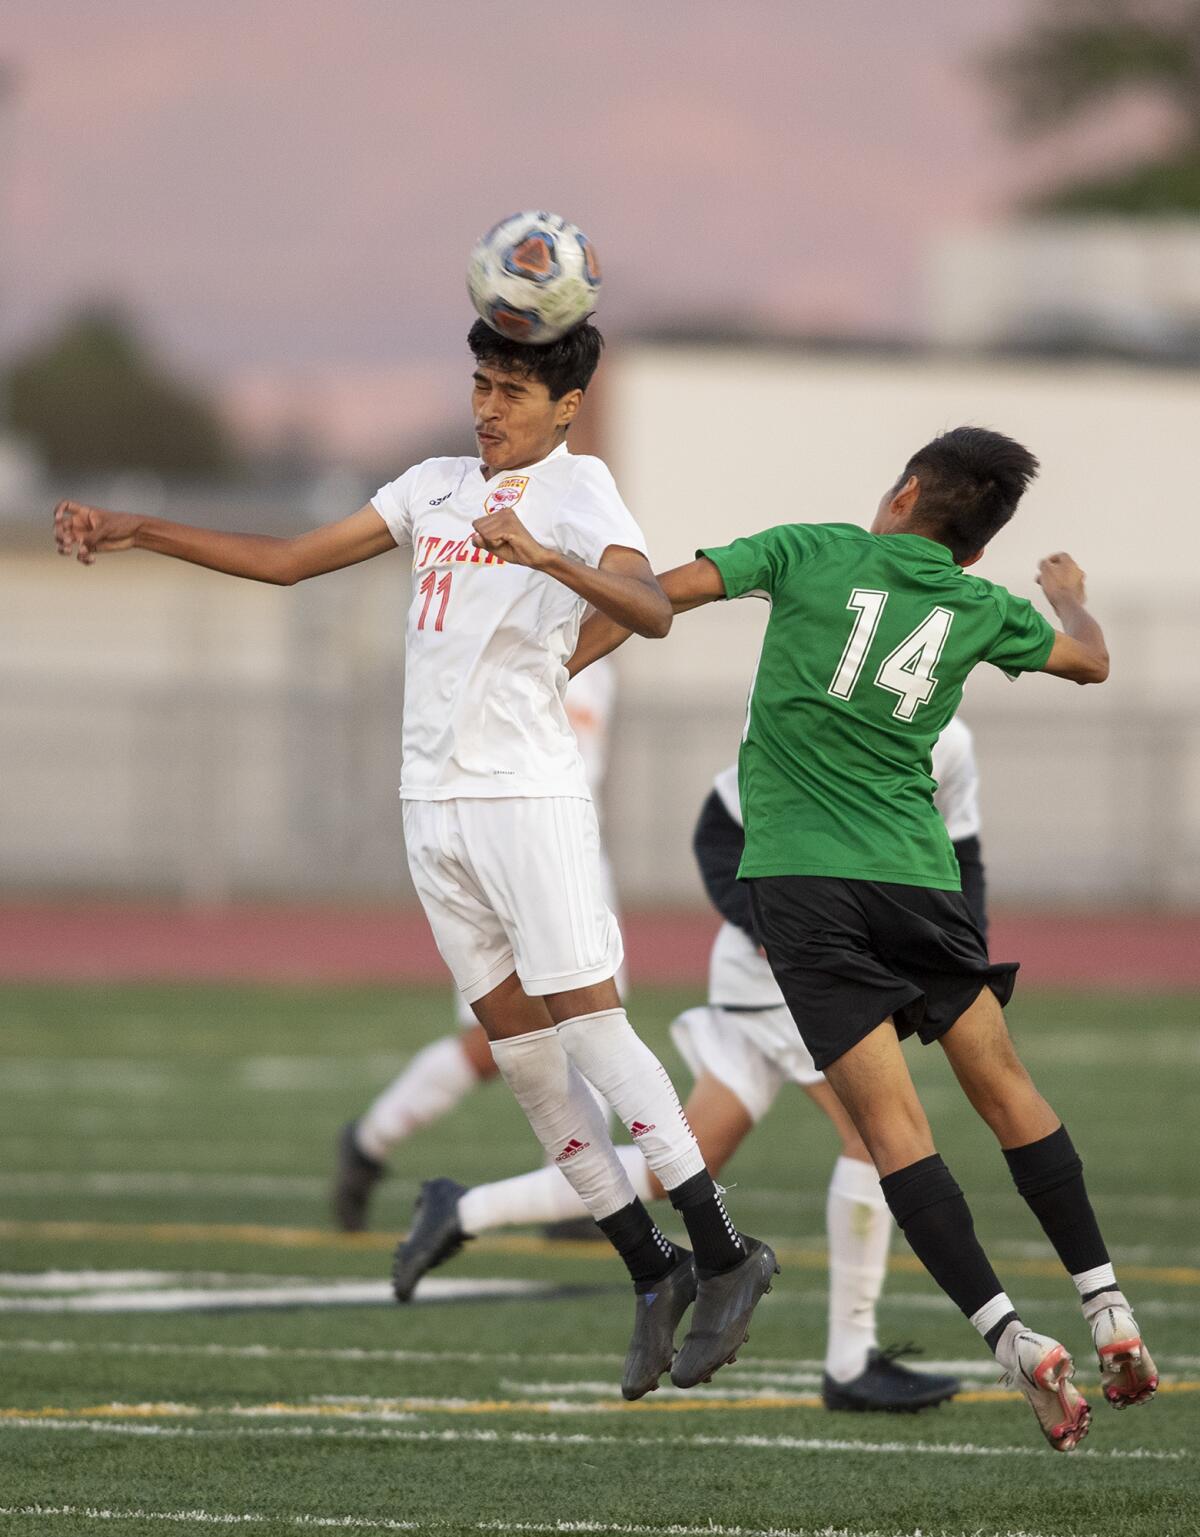 Estancia's Kevin Flores goes up for a header against Costa Mesa's Kevin Perez Cruz on Wednesday.